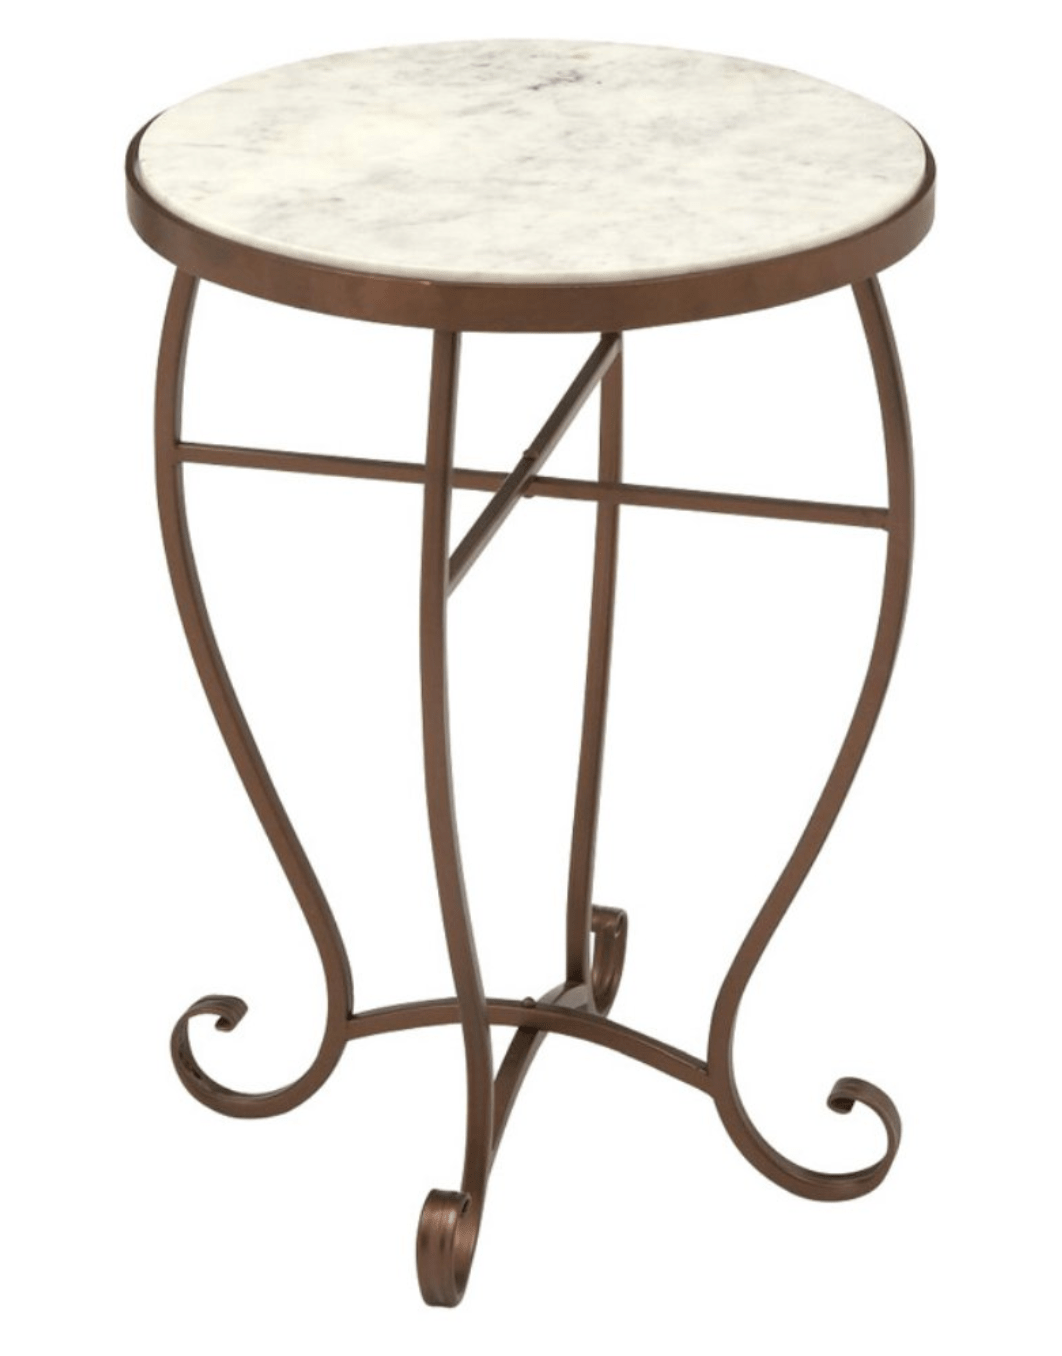 lovely small accent table for compact marble round min tables furniture top countertop dining room sets vita lampen black and brass coffee battery operated lamps unique light